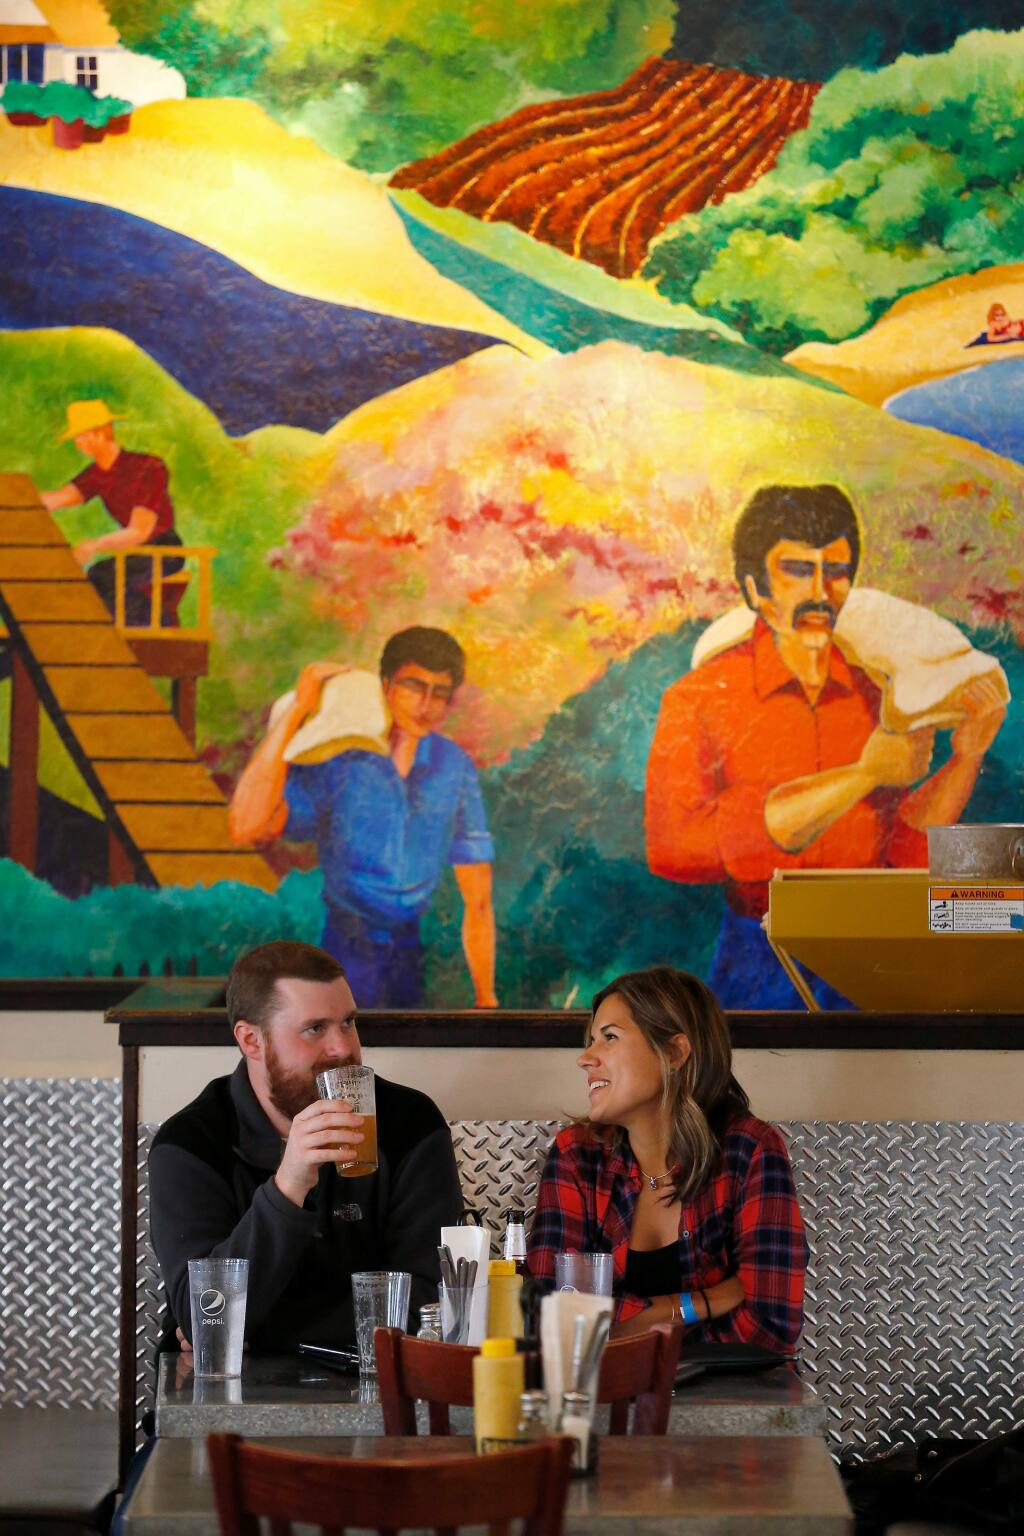 Noah Schmidt and Emily McClelland of Santa Rosa enjoy some drinks at Bear Republic Brewing Company's taproom in Healdsburg, California, on Saturday, October 19, 2019. Bear Republic Brewing Company recently announced the closing of their original brewpub in Healdsburg, after 25 years of operation. (Alvin Jornada / The Press Democrat)